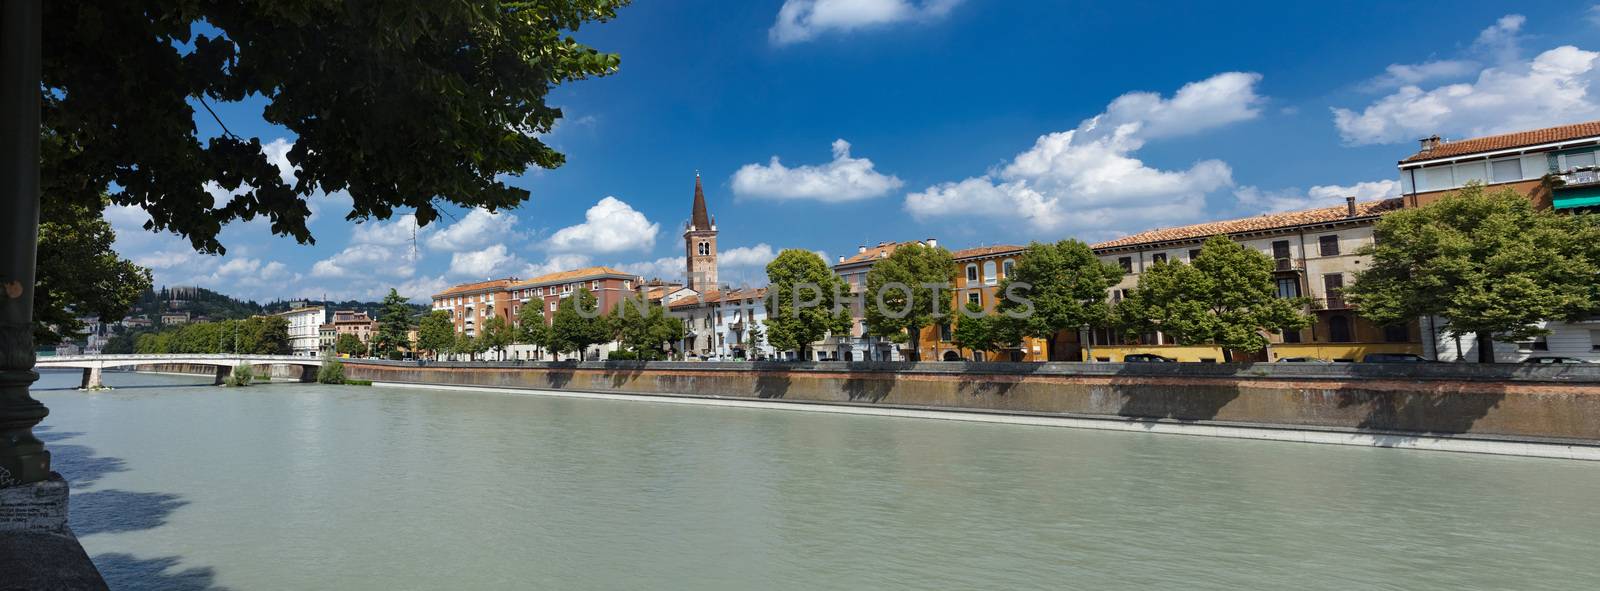 Verona, Italy, Europe, August 2019, A view of the River Adige an by ElectricEggPhoto